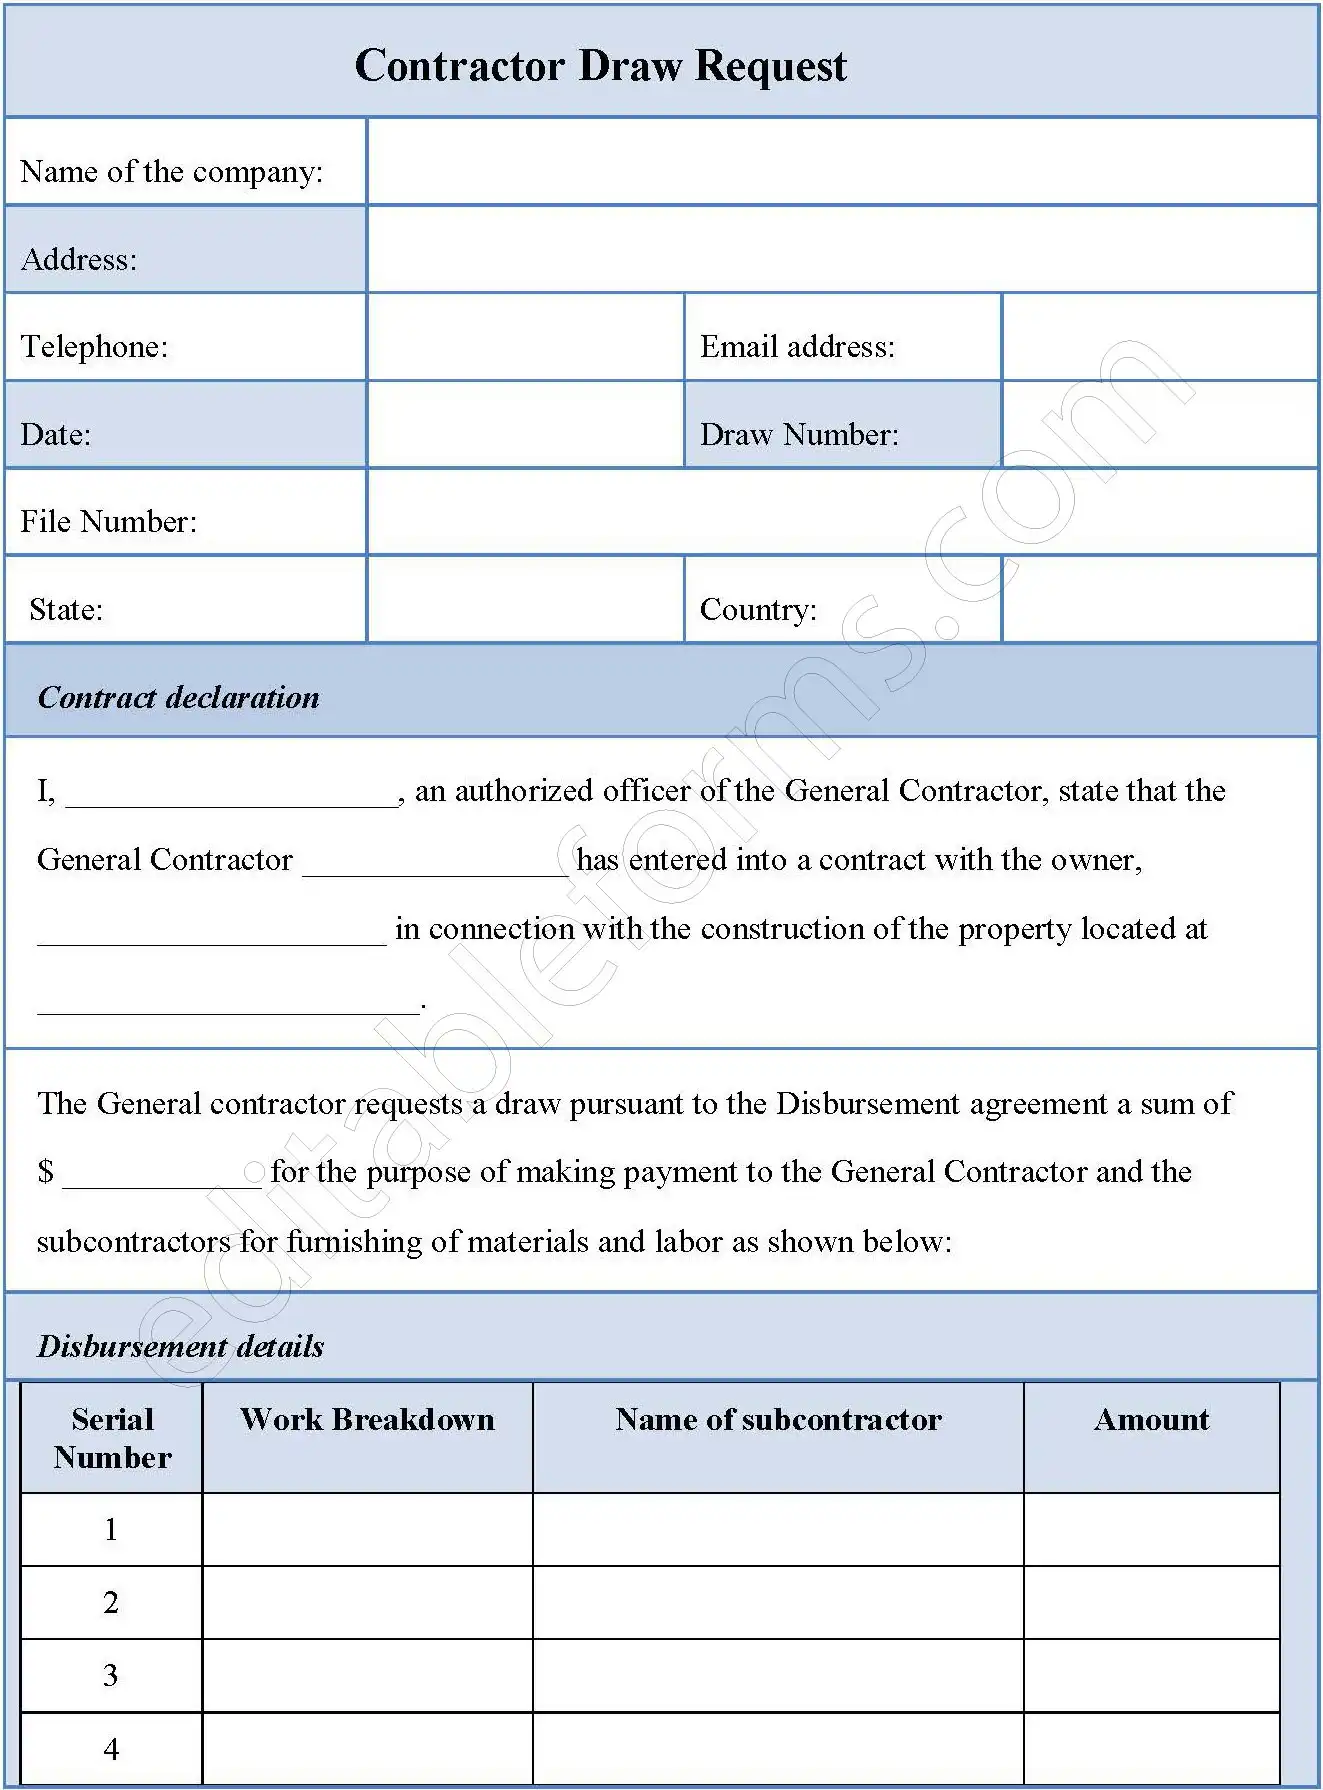 Contractor Draw Request Fillable PDF Template